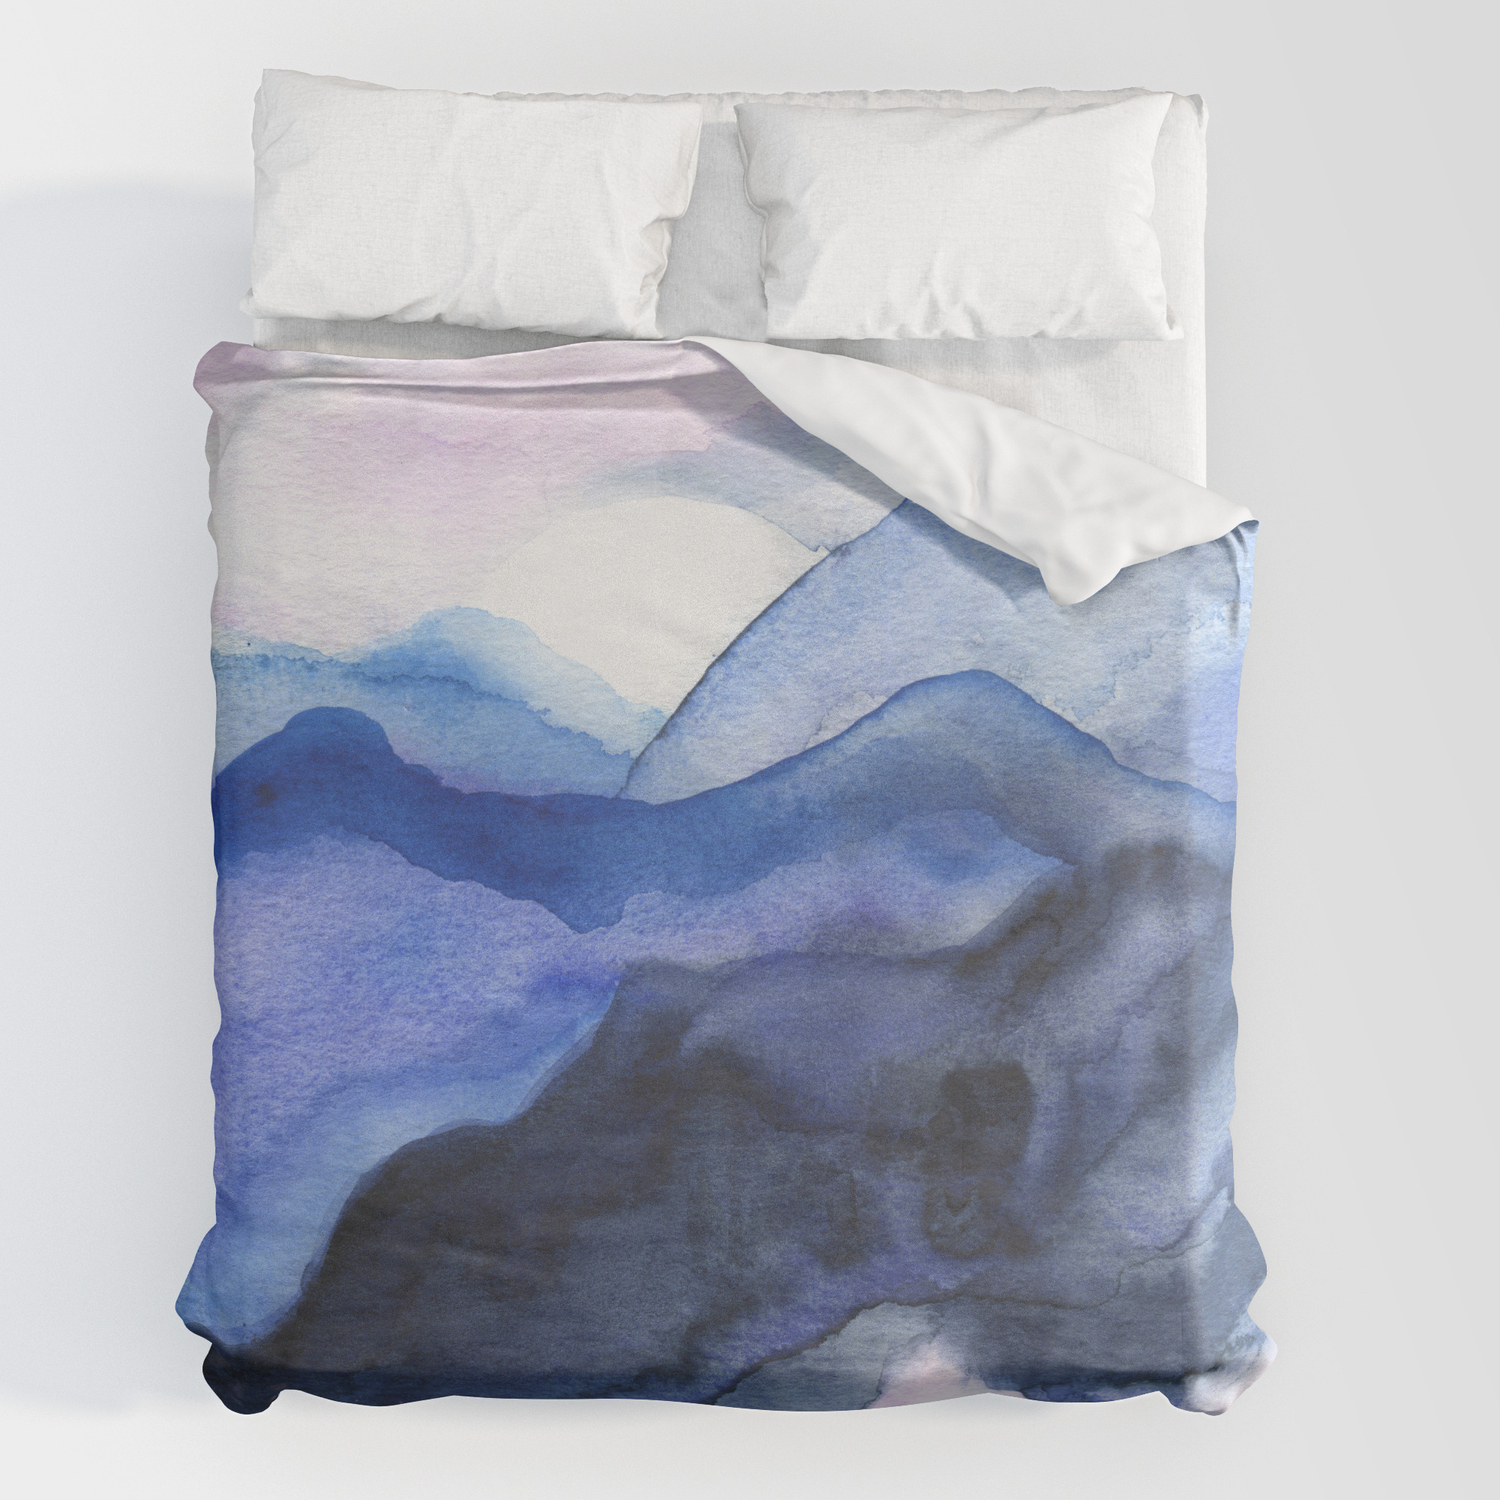 Abstract Watercolor Duvet Cover, Watercolor Duvet Cover